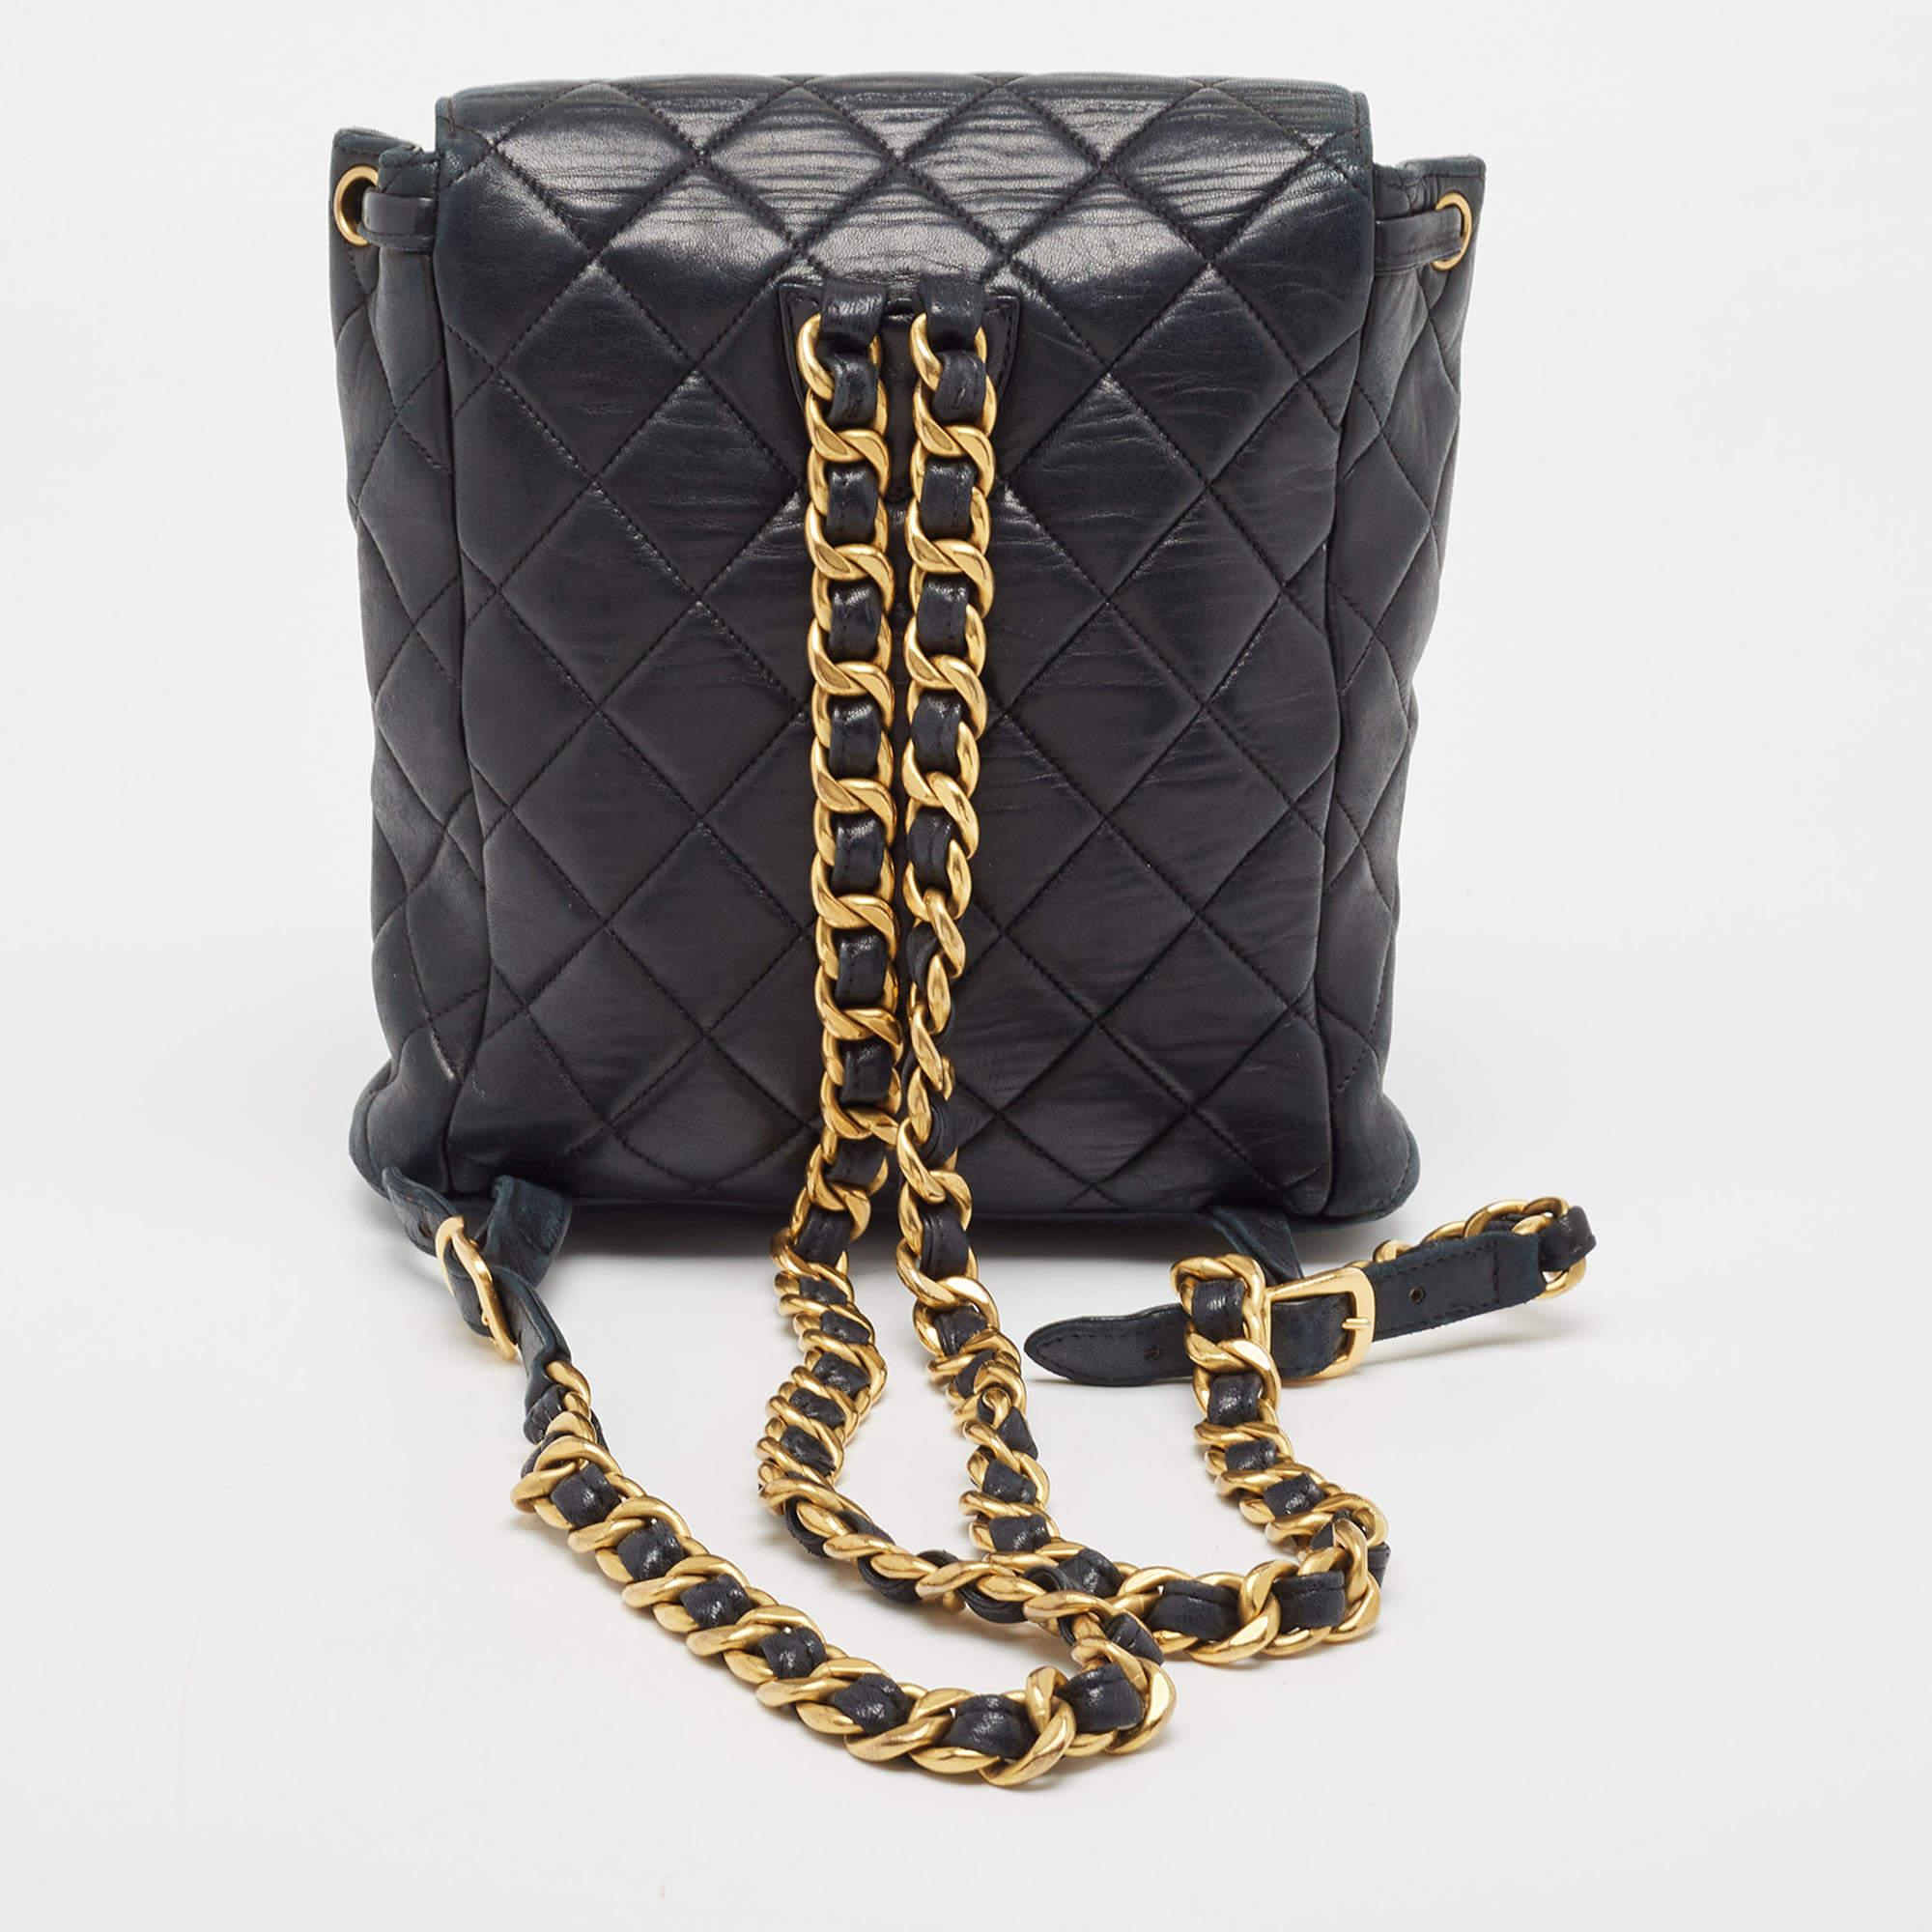 Elevate your style with this Chanel backpack. Crafted with precision and passion, this chic accessory seamlessly blends fashion and function, offering an elegant solution for the modern, on-the-go lifestyle.

